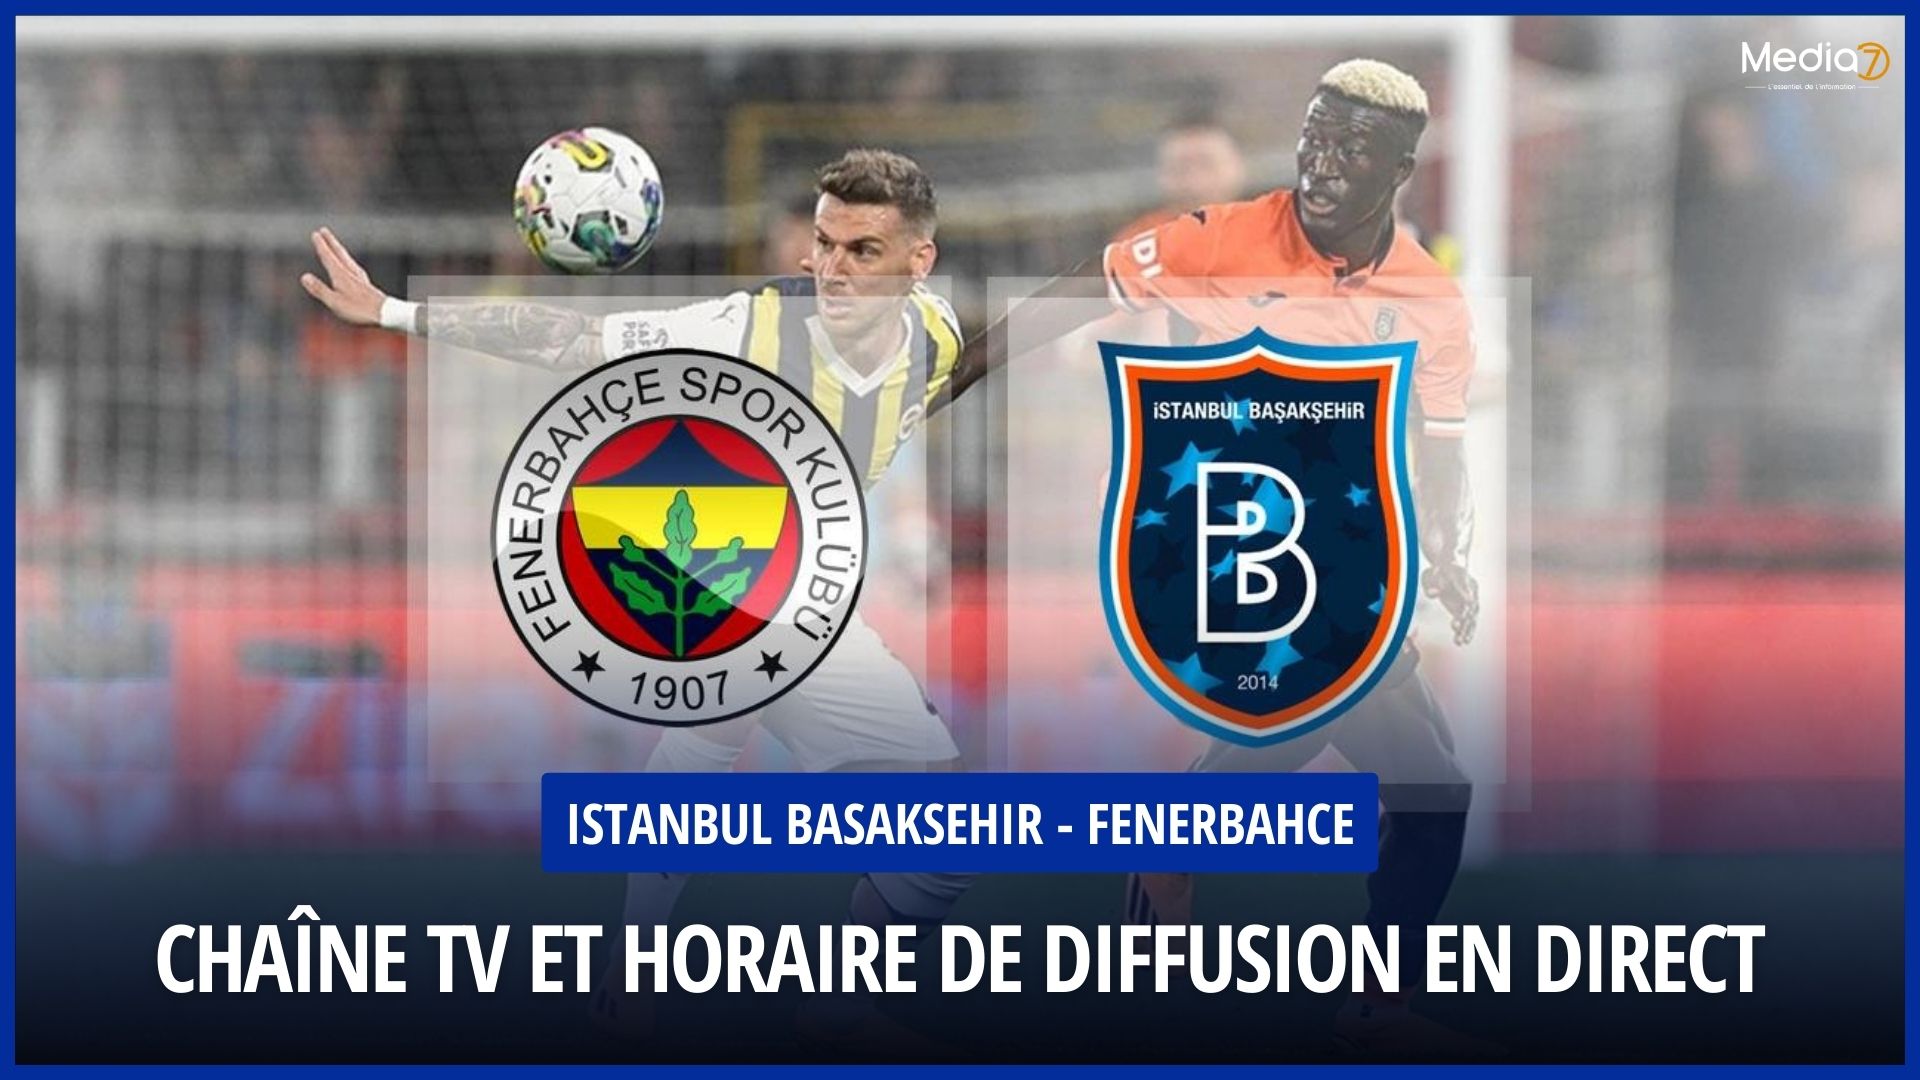 Match Istanbul Basaksehir - Fenerbahce Live: TV Channel and Broadcast Schedule - Media7